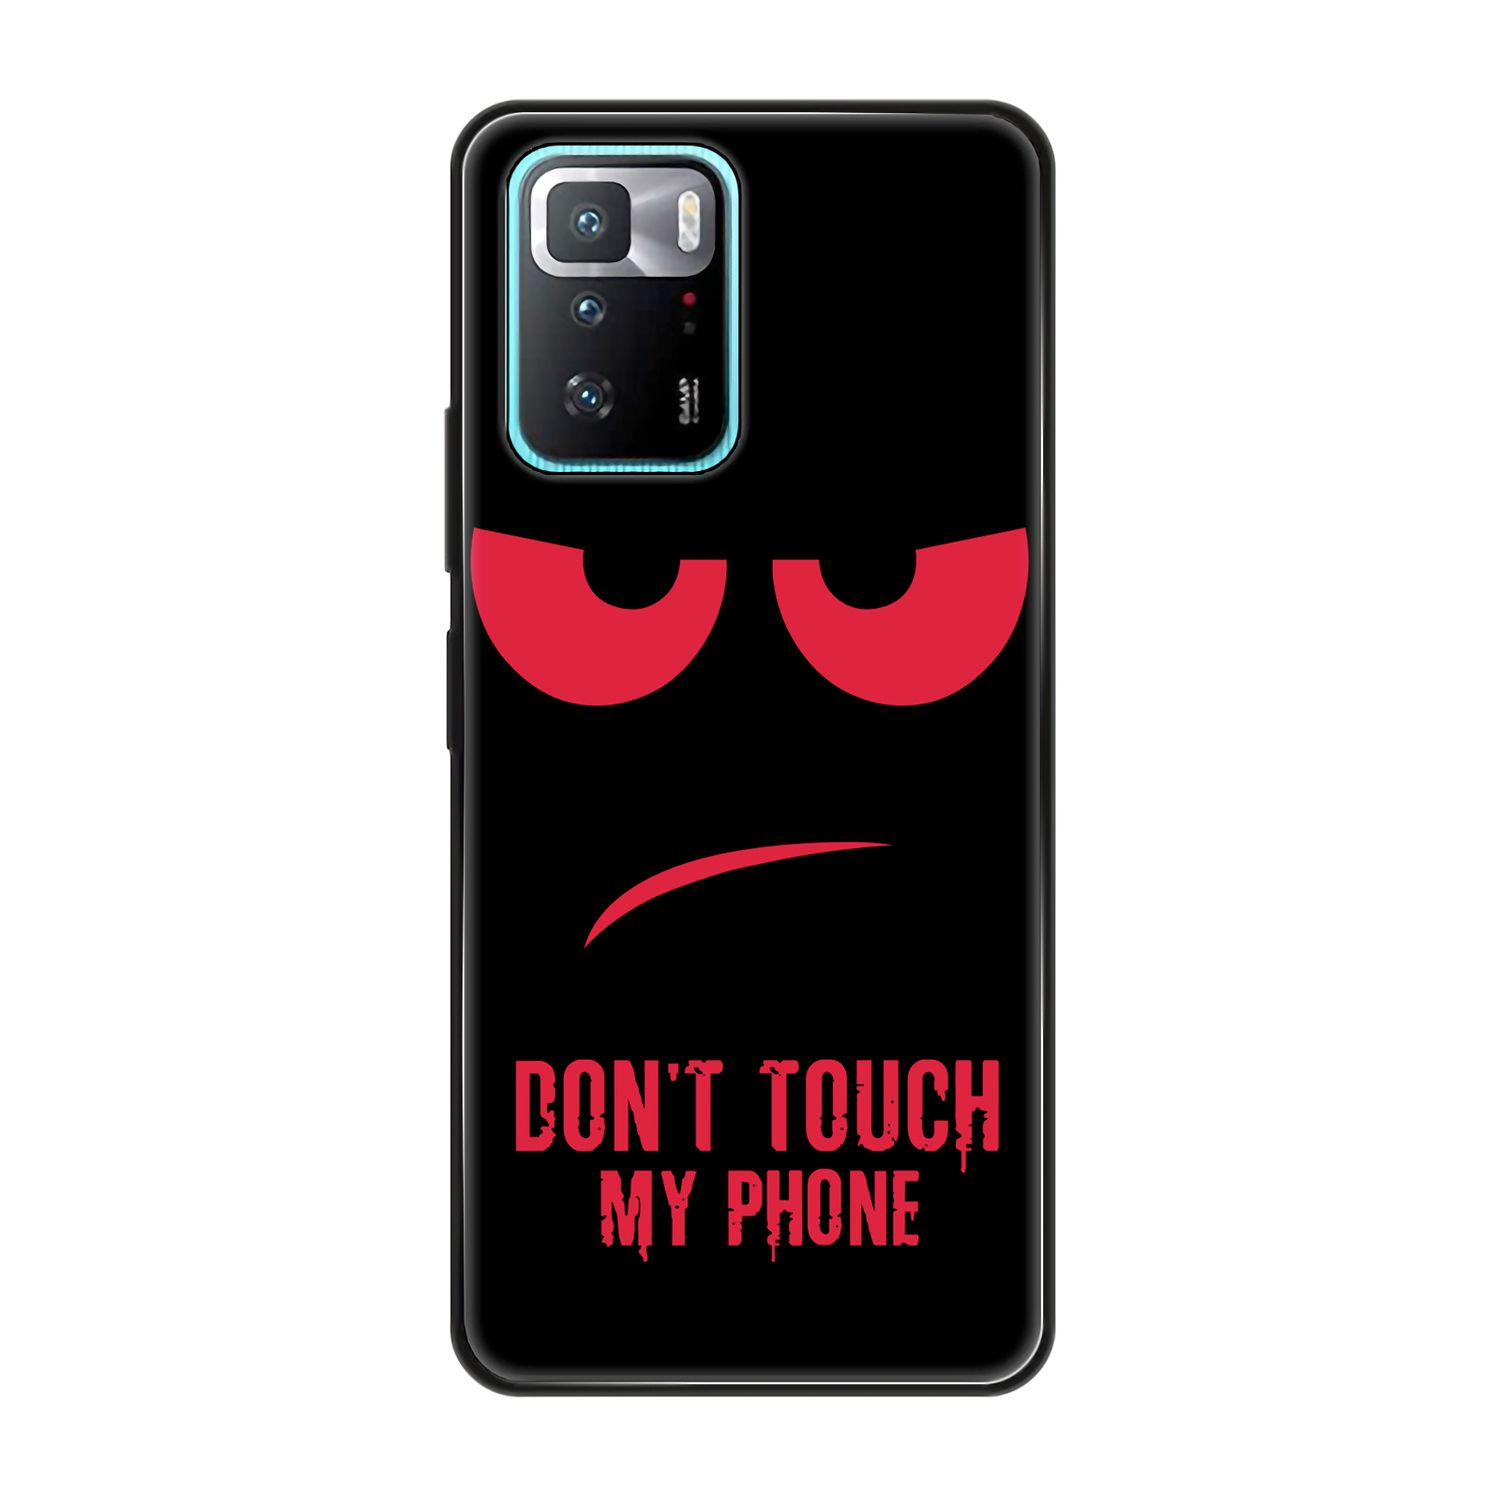 KÖNIG DESIGN Case, Rot X3 Backcover, My Dont Xiaomi, Phone Touch GT, Poco